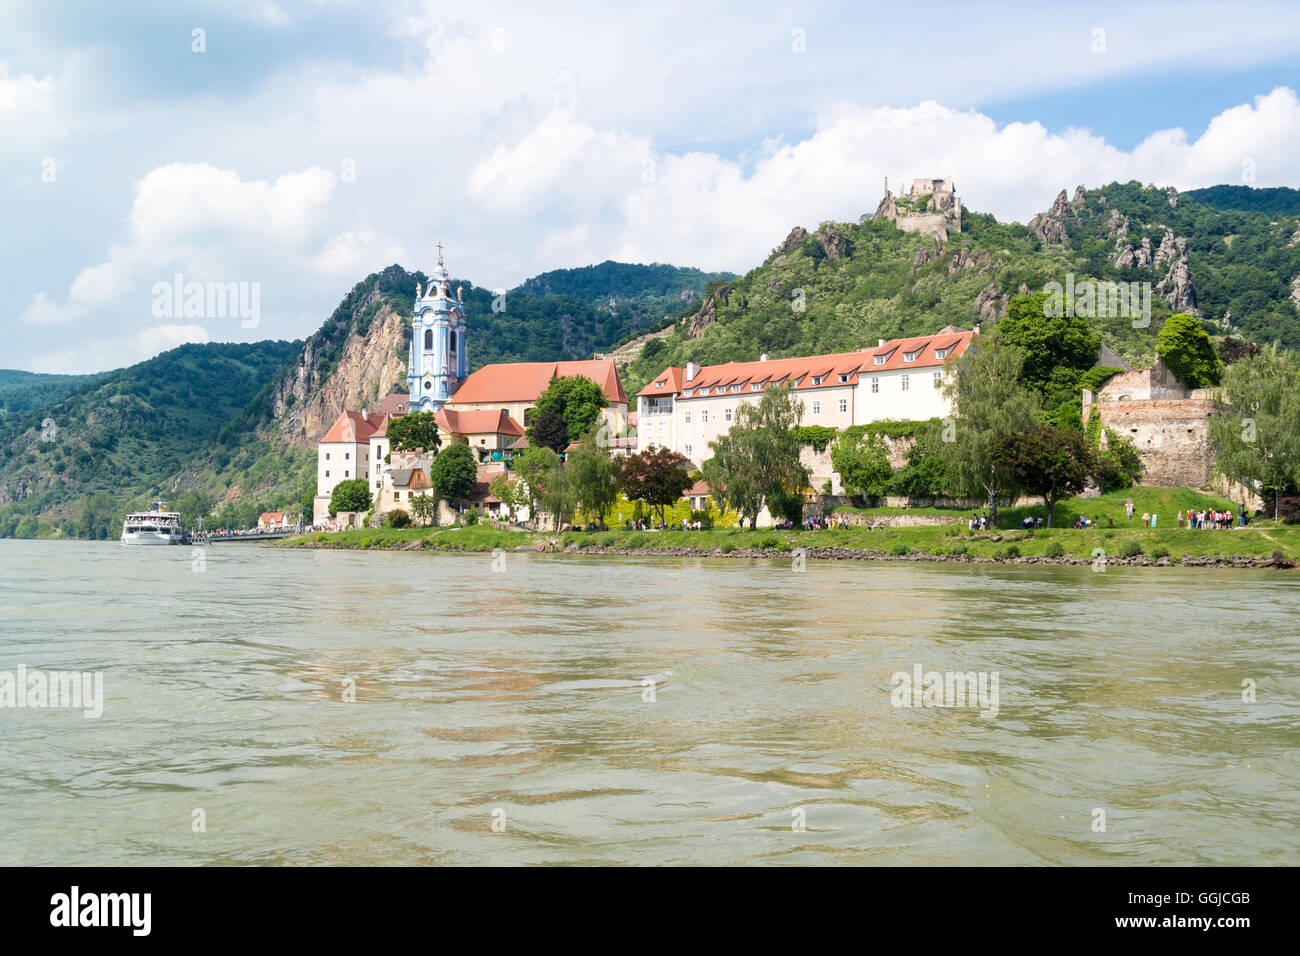 Town of Durnstein with abbey and old castle from Danube river, Wachau Valley, Lower Austria Stock Photo